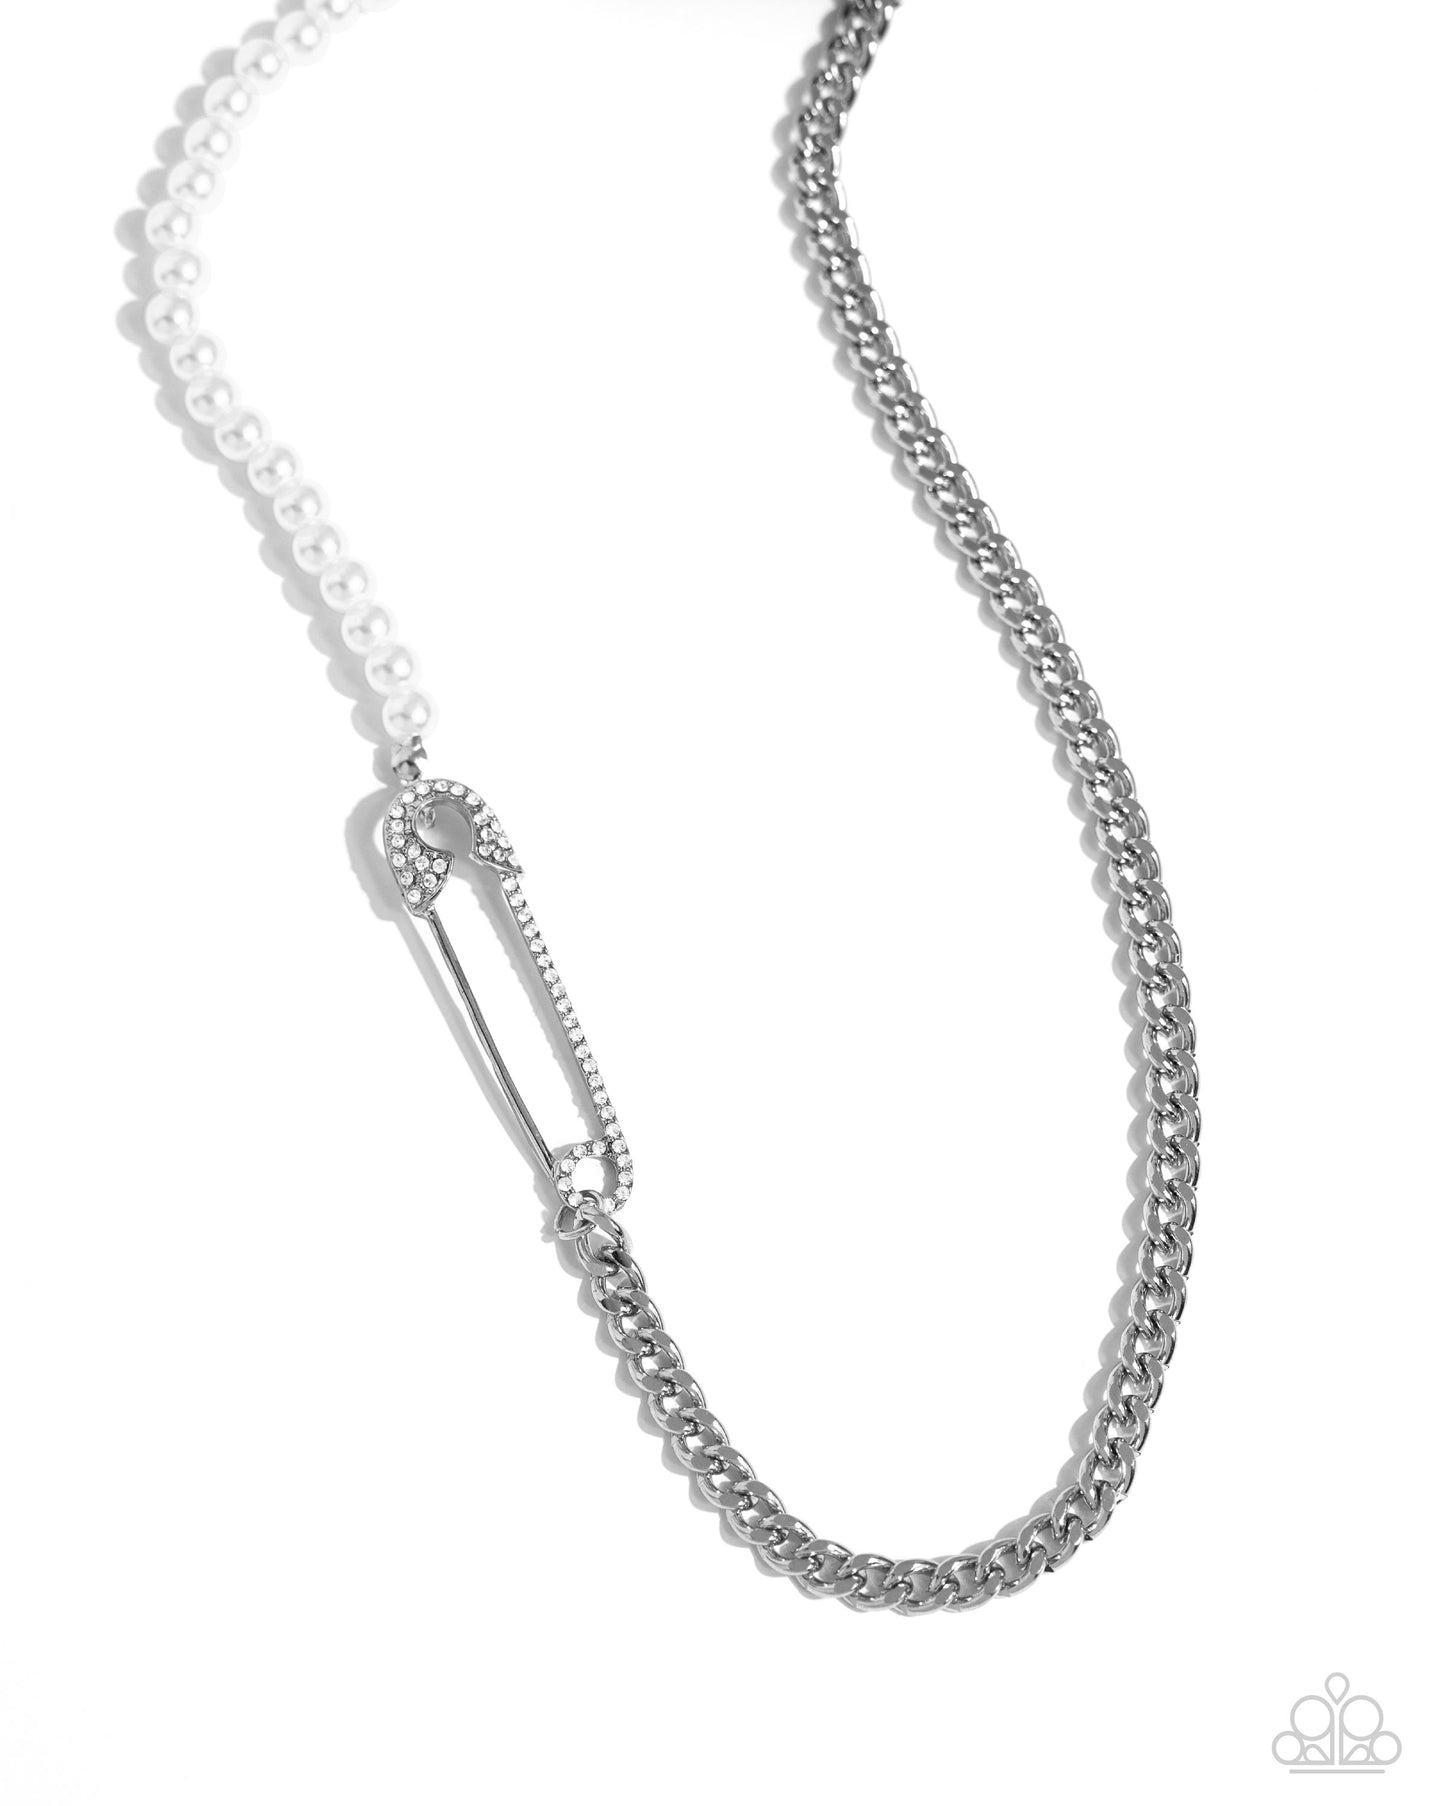 Safety Pin Style White Pearl Necklace - Paparazzi Accessories A strand of white pearls collides with a layer of chain to create an abstract blend of grit and glitz. The links of the curb chain offset the pearly sheen of the beads that lay on the opposite side, perfectly balancing the contrasting design. A white rhinestone-embellished oversized safety pin charm connects the two strands for a surprising hint of edge.  SKU: P2ED-WTXX-070VX Earring: "Safety Pin Sentiment - White" (Sold Separately)